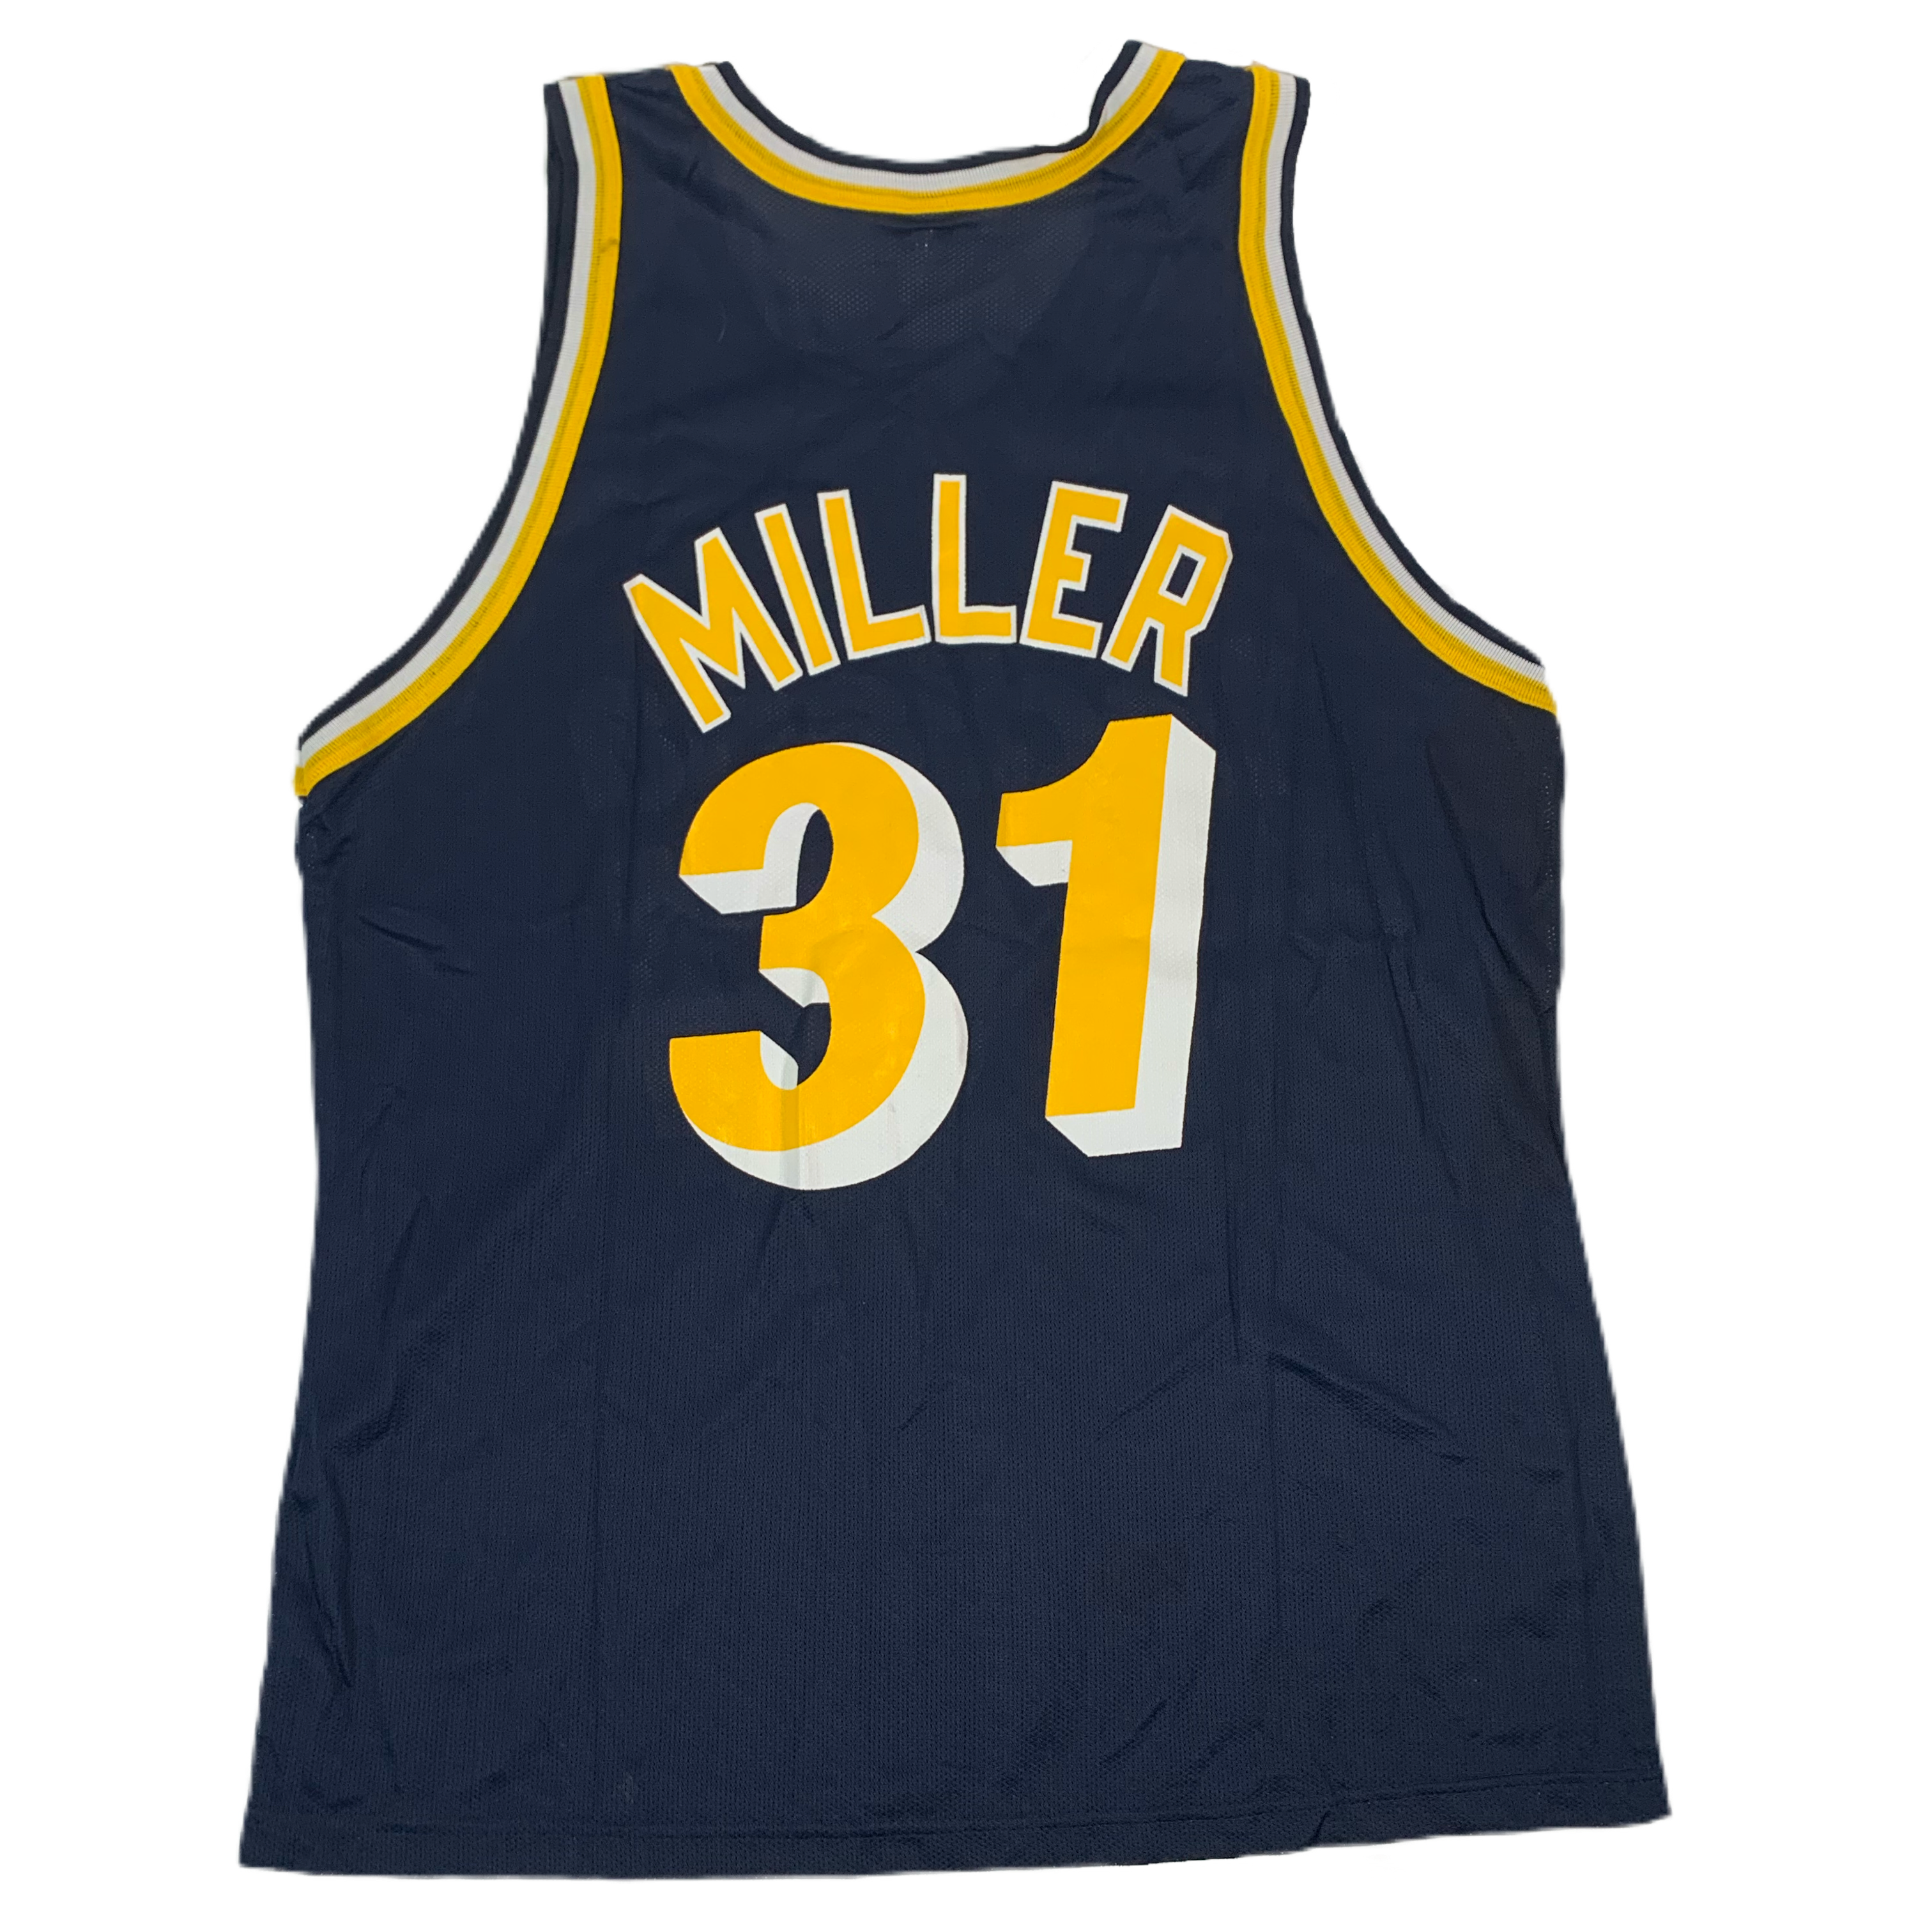 Pacers basketball jersey